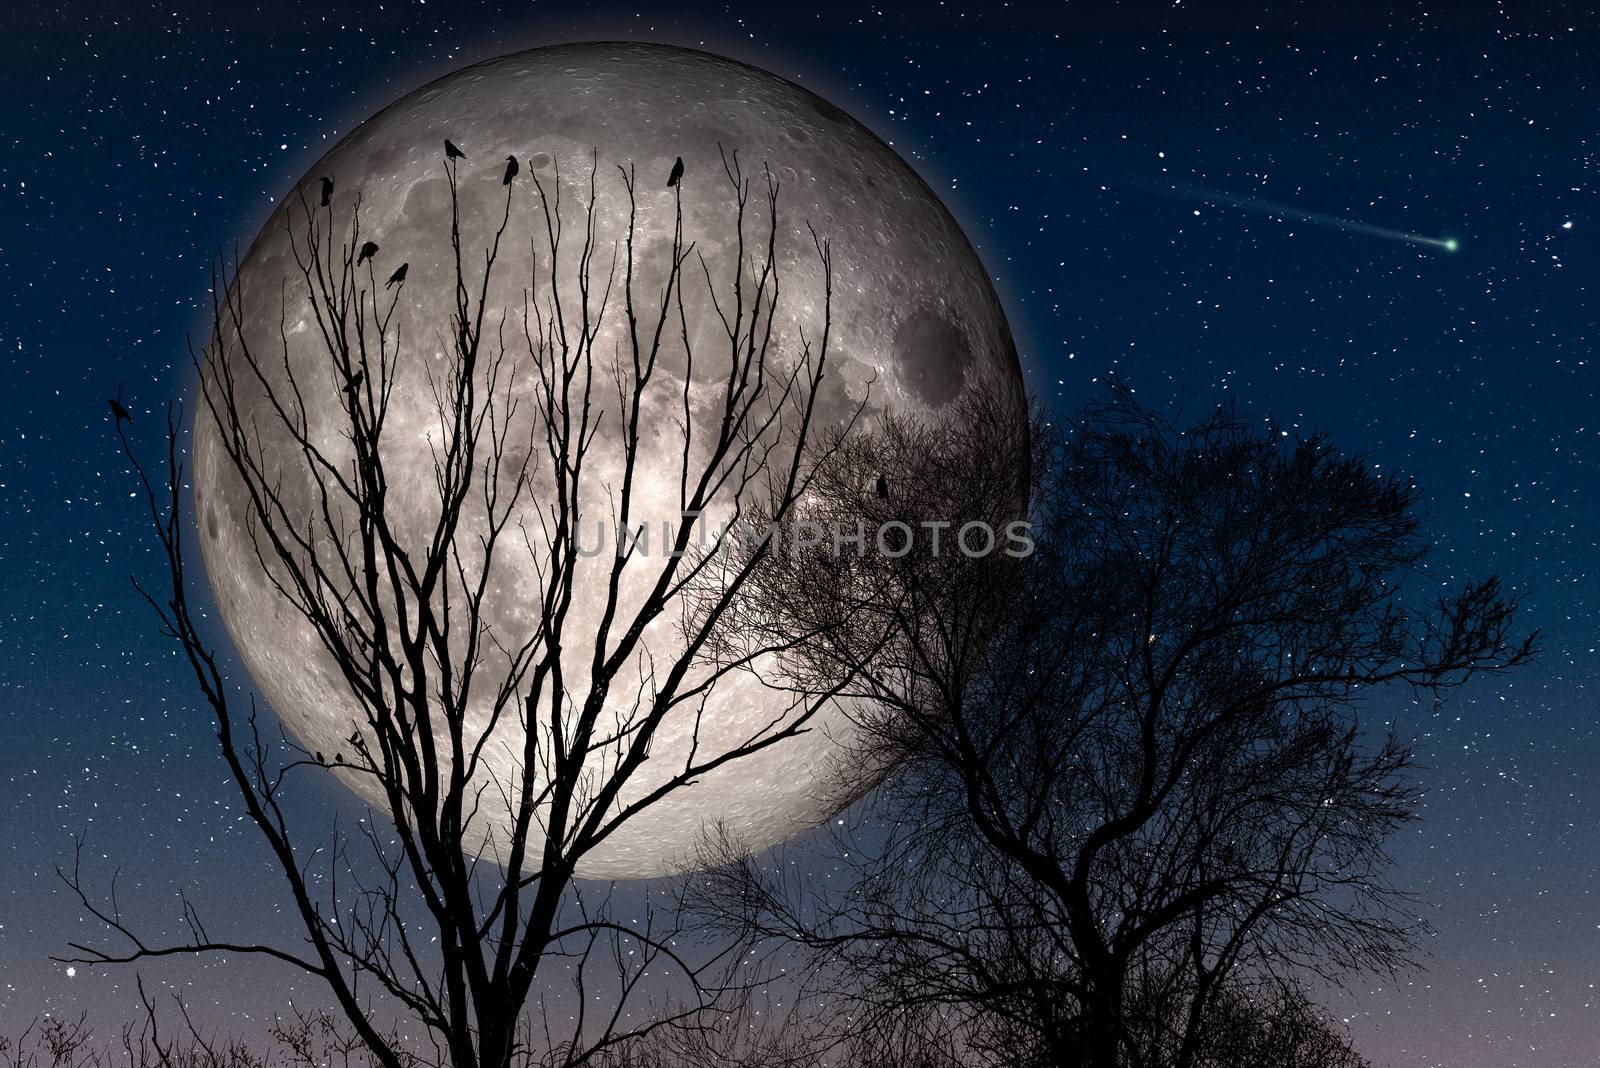 Crows perched on the top of tree branches are waiting to take flight during the night with a big Moon and a starry sky with a comet. Elements of this image furnished by NASA